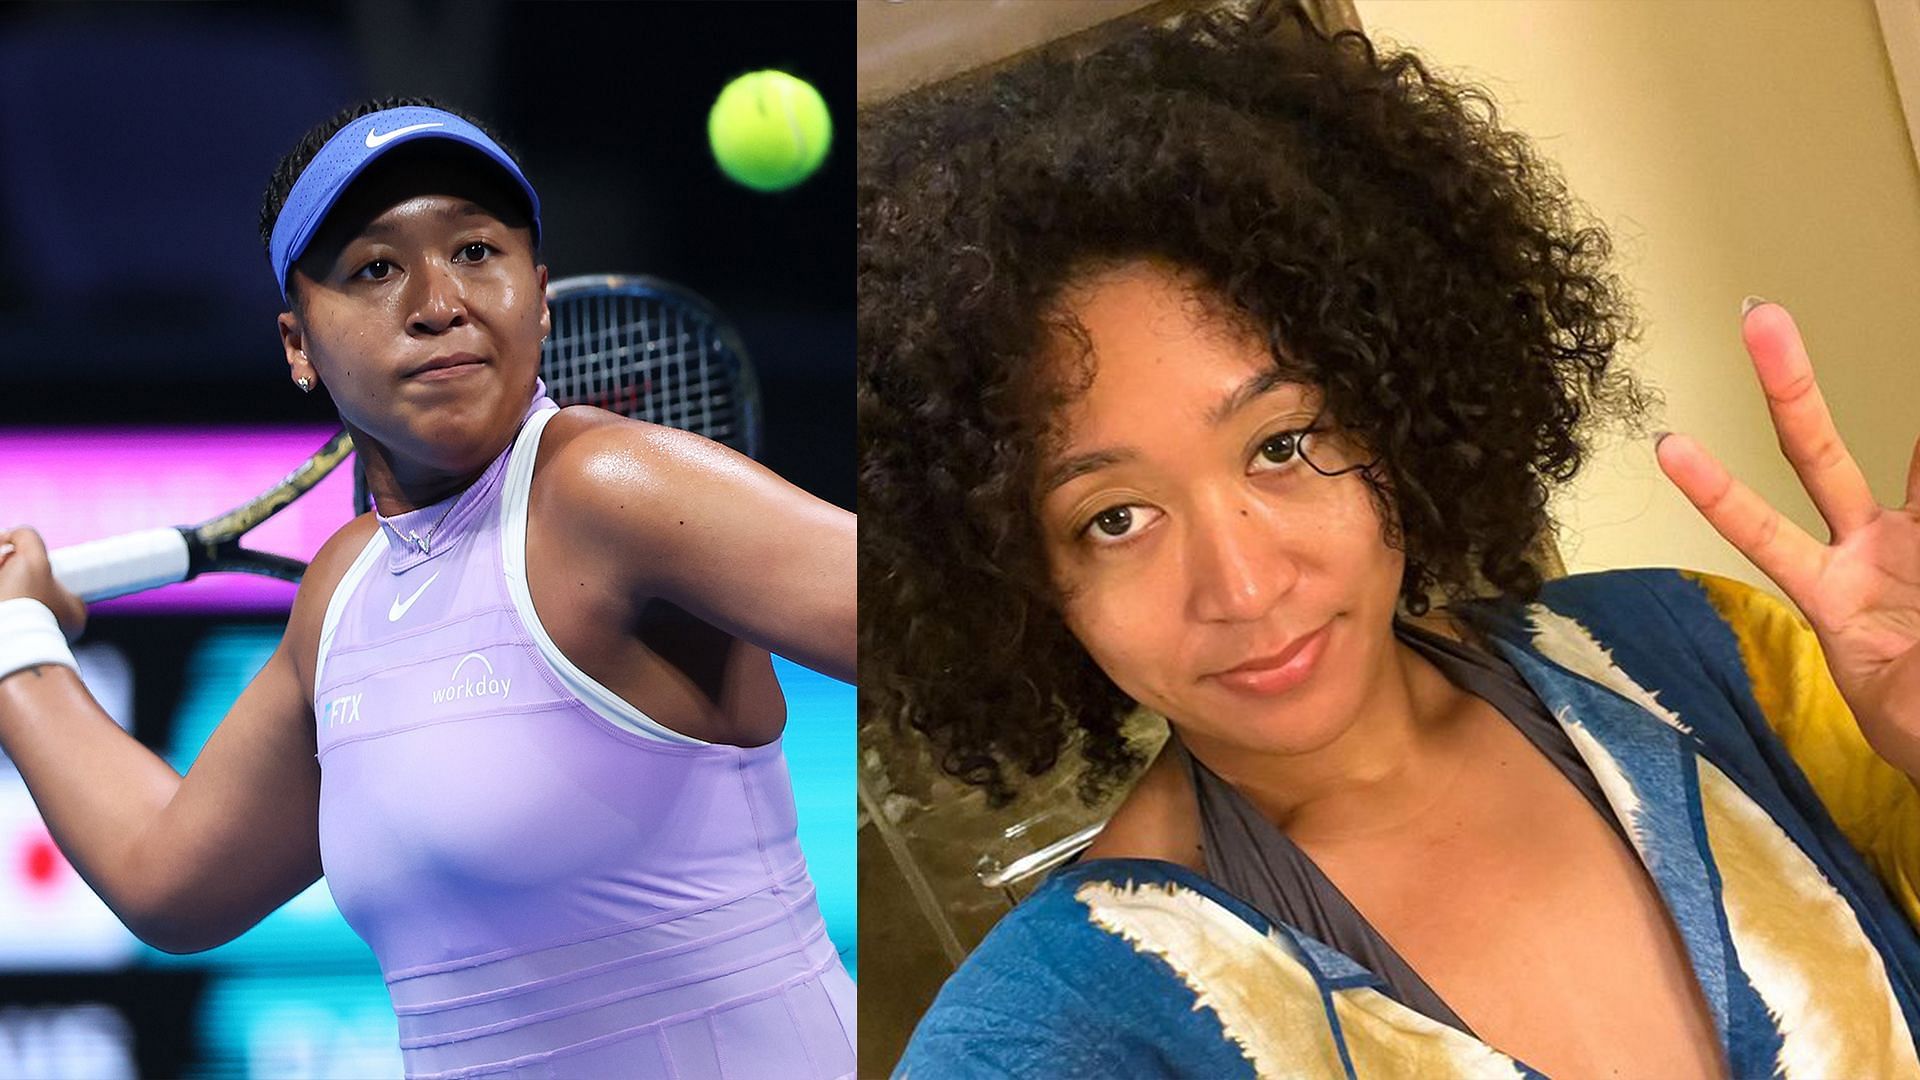 In pictures: Naomi Osaka shows off new hairstyle during vacation in Hawaii